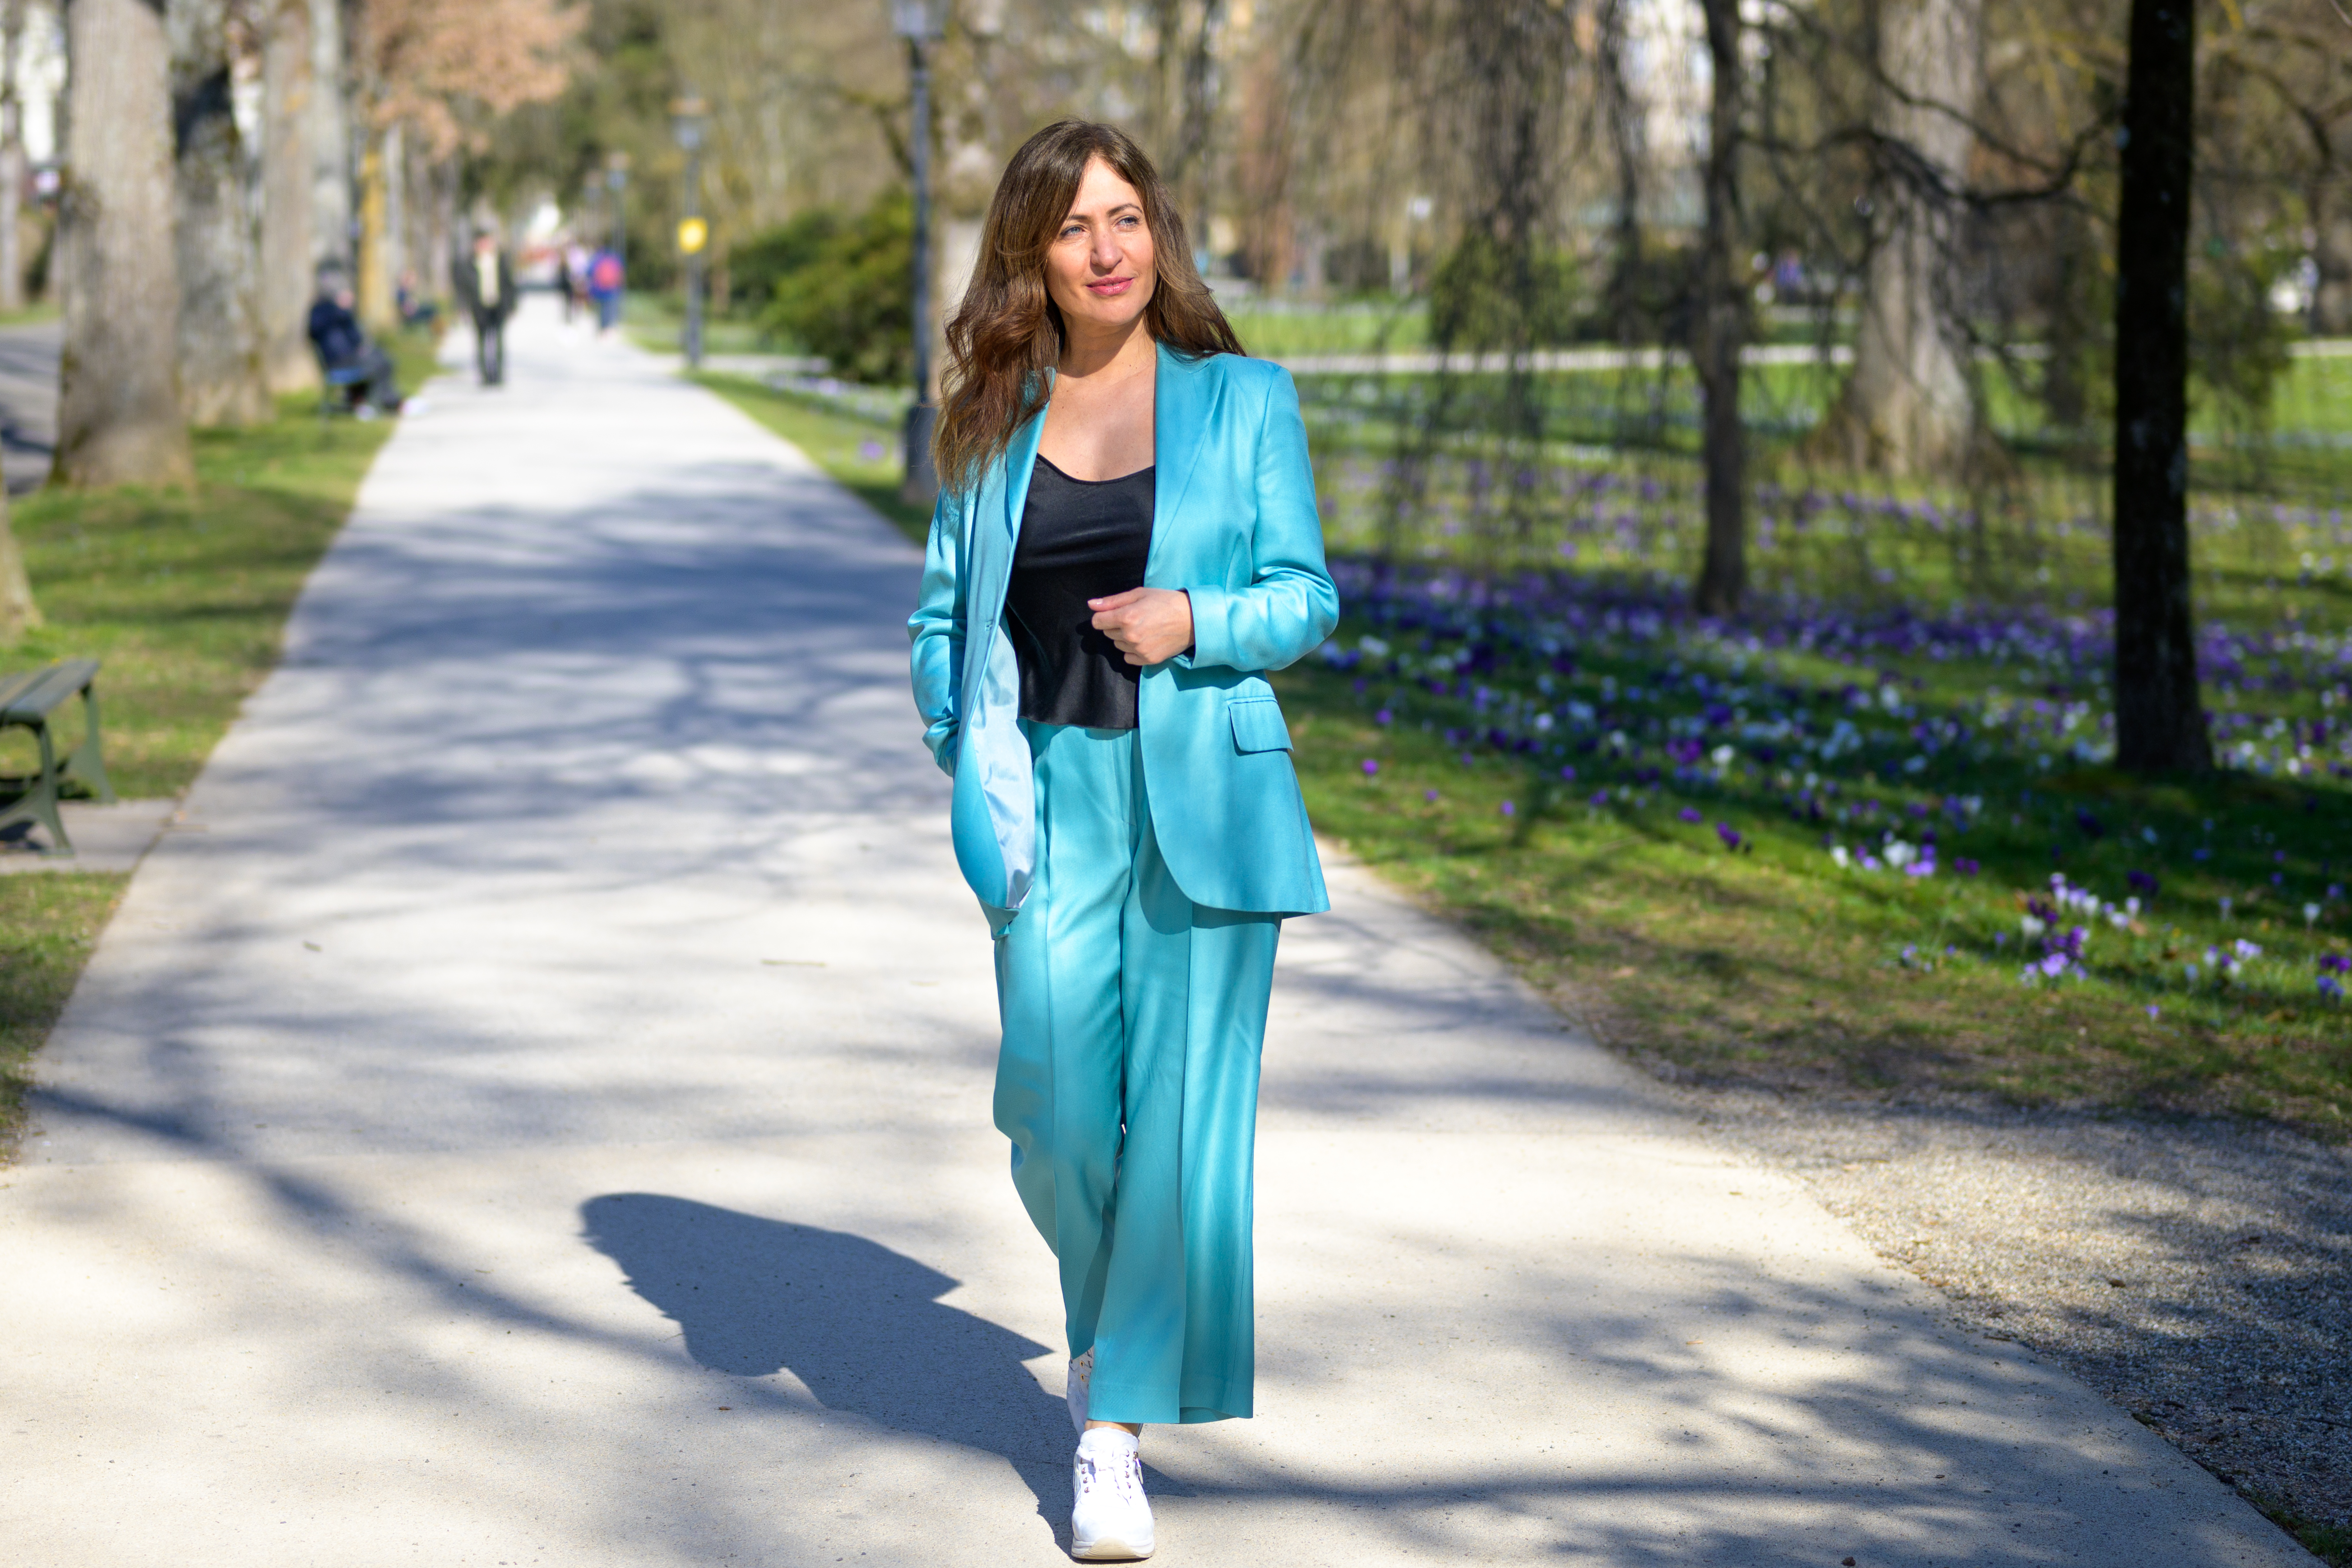 A stylish, attractive middle-aged woman in a turquoise pantsuit